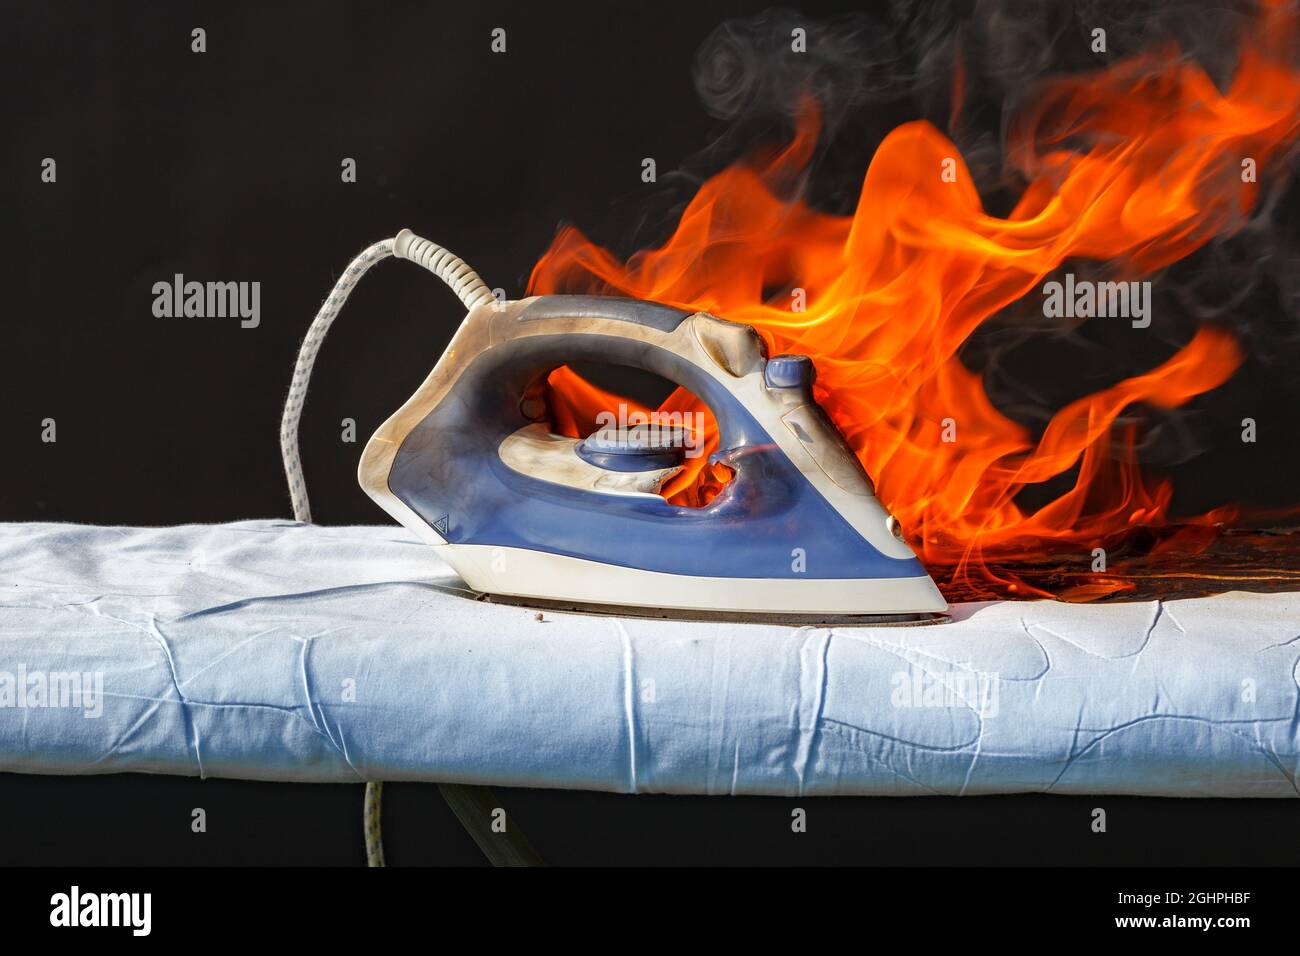 Iron in flames of fire, faulty wiring, cause of fire Stock Photo